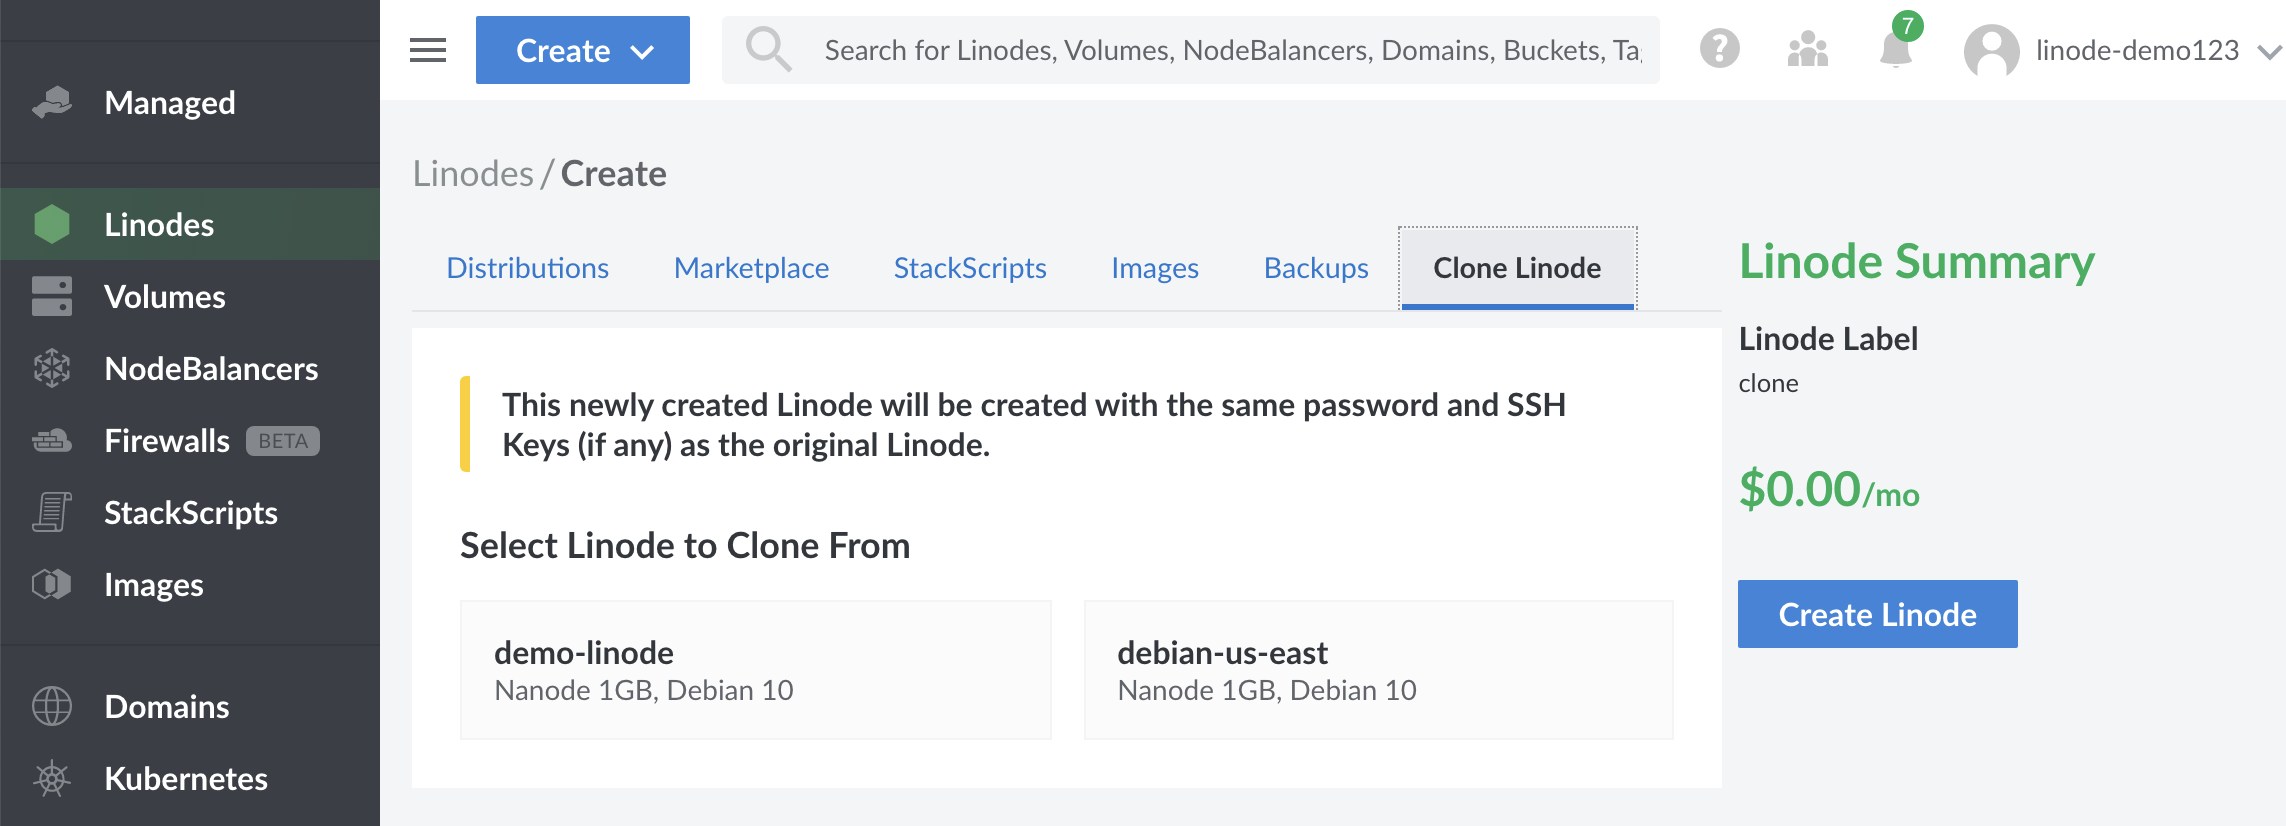 Select the &lsquo;Clone Linode&rsquo; tab to clone an existing Linode.